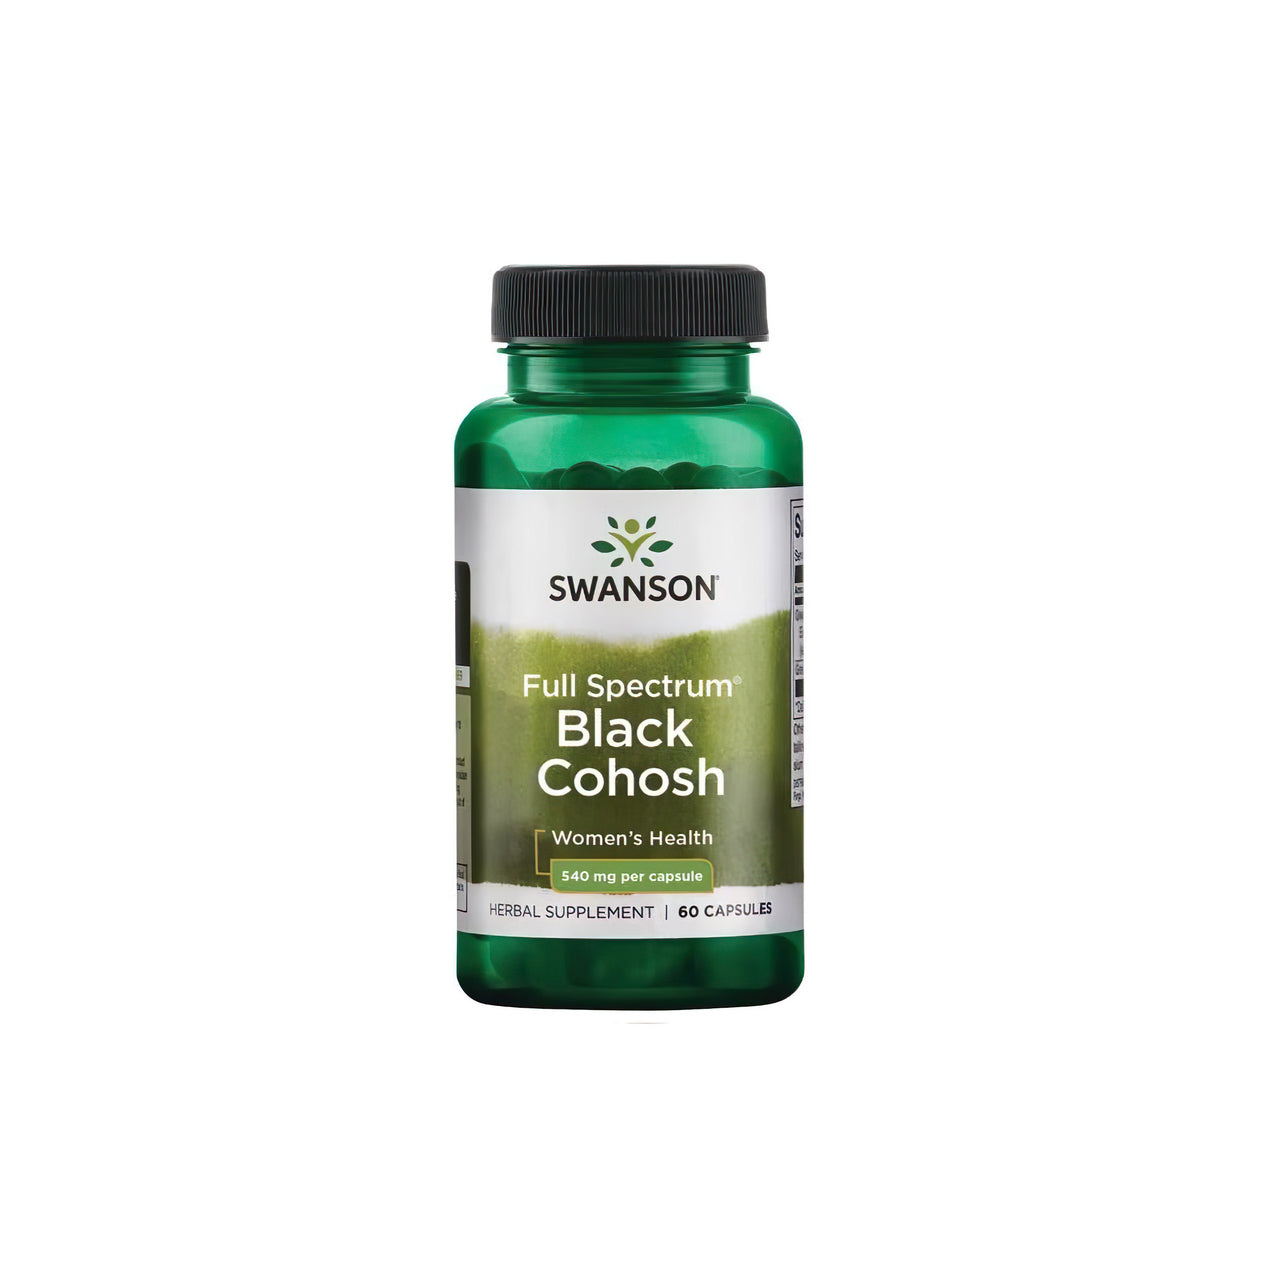 Bottle of Swanson Black Cohosh 540 mg 60 Capsules, a herbal supplement for hormonal balance and menopause relief in women's health.